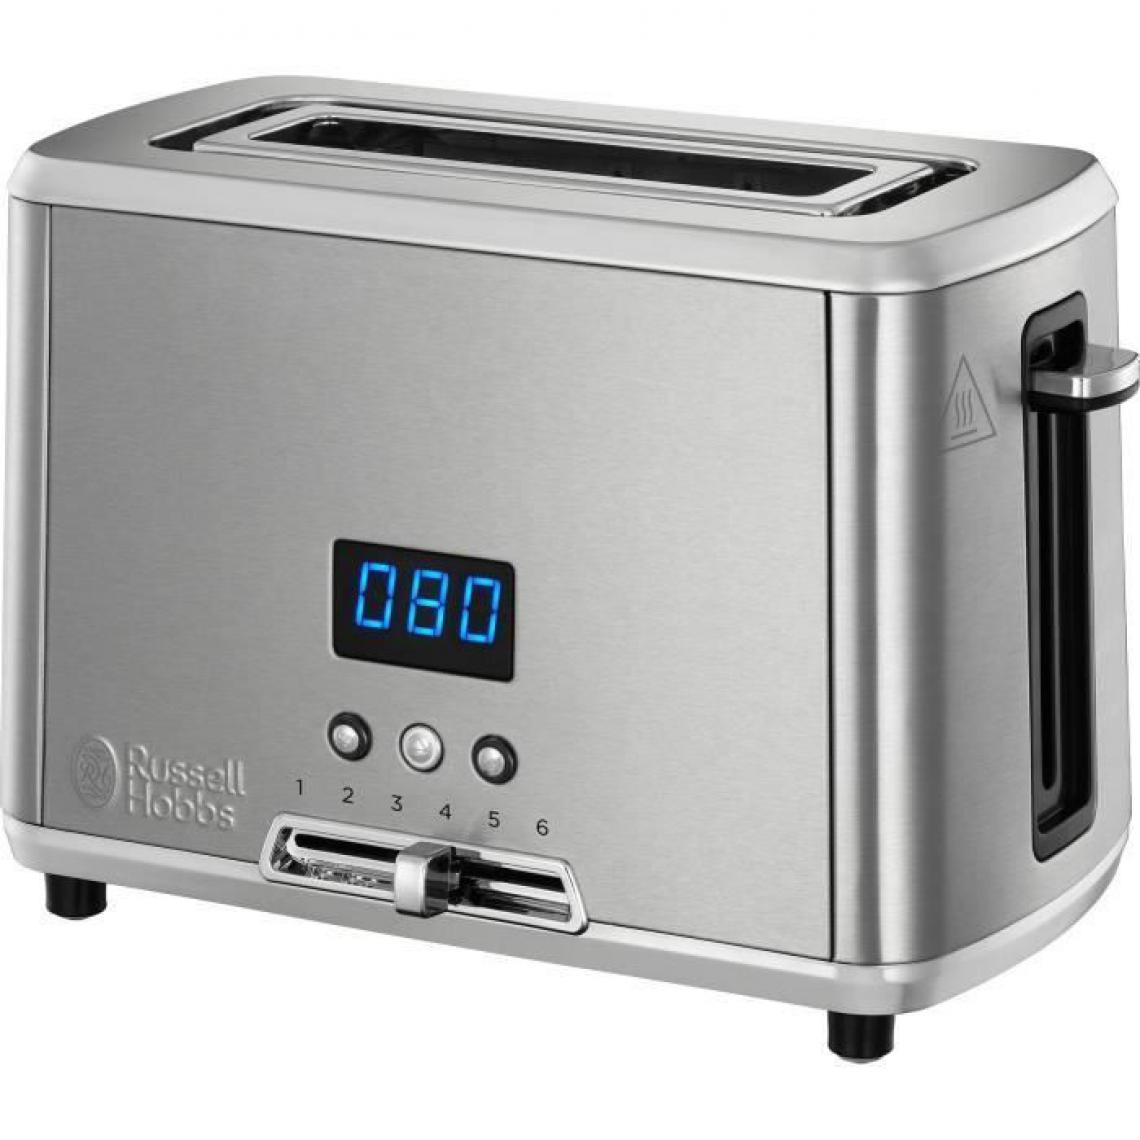 Russell Hobbs - RUSSELL HOBBS 24200-56 Toaster Grille-Pain Compact Home, Température Ajustable, Rapide, Chauffe Viennoiserie - Inox - Grille-pain